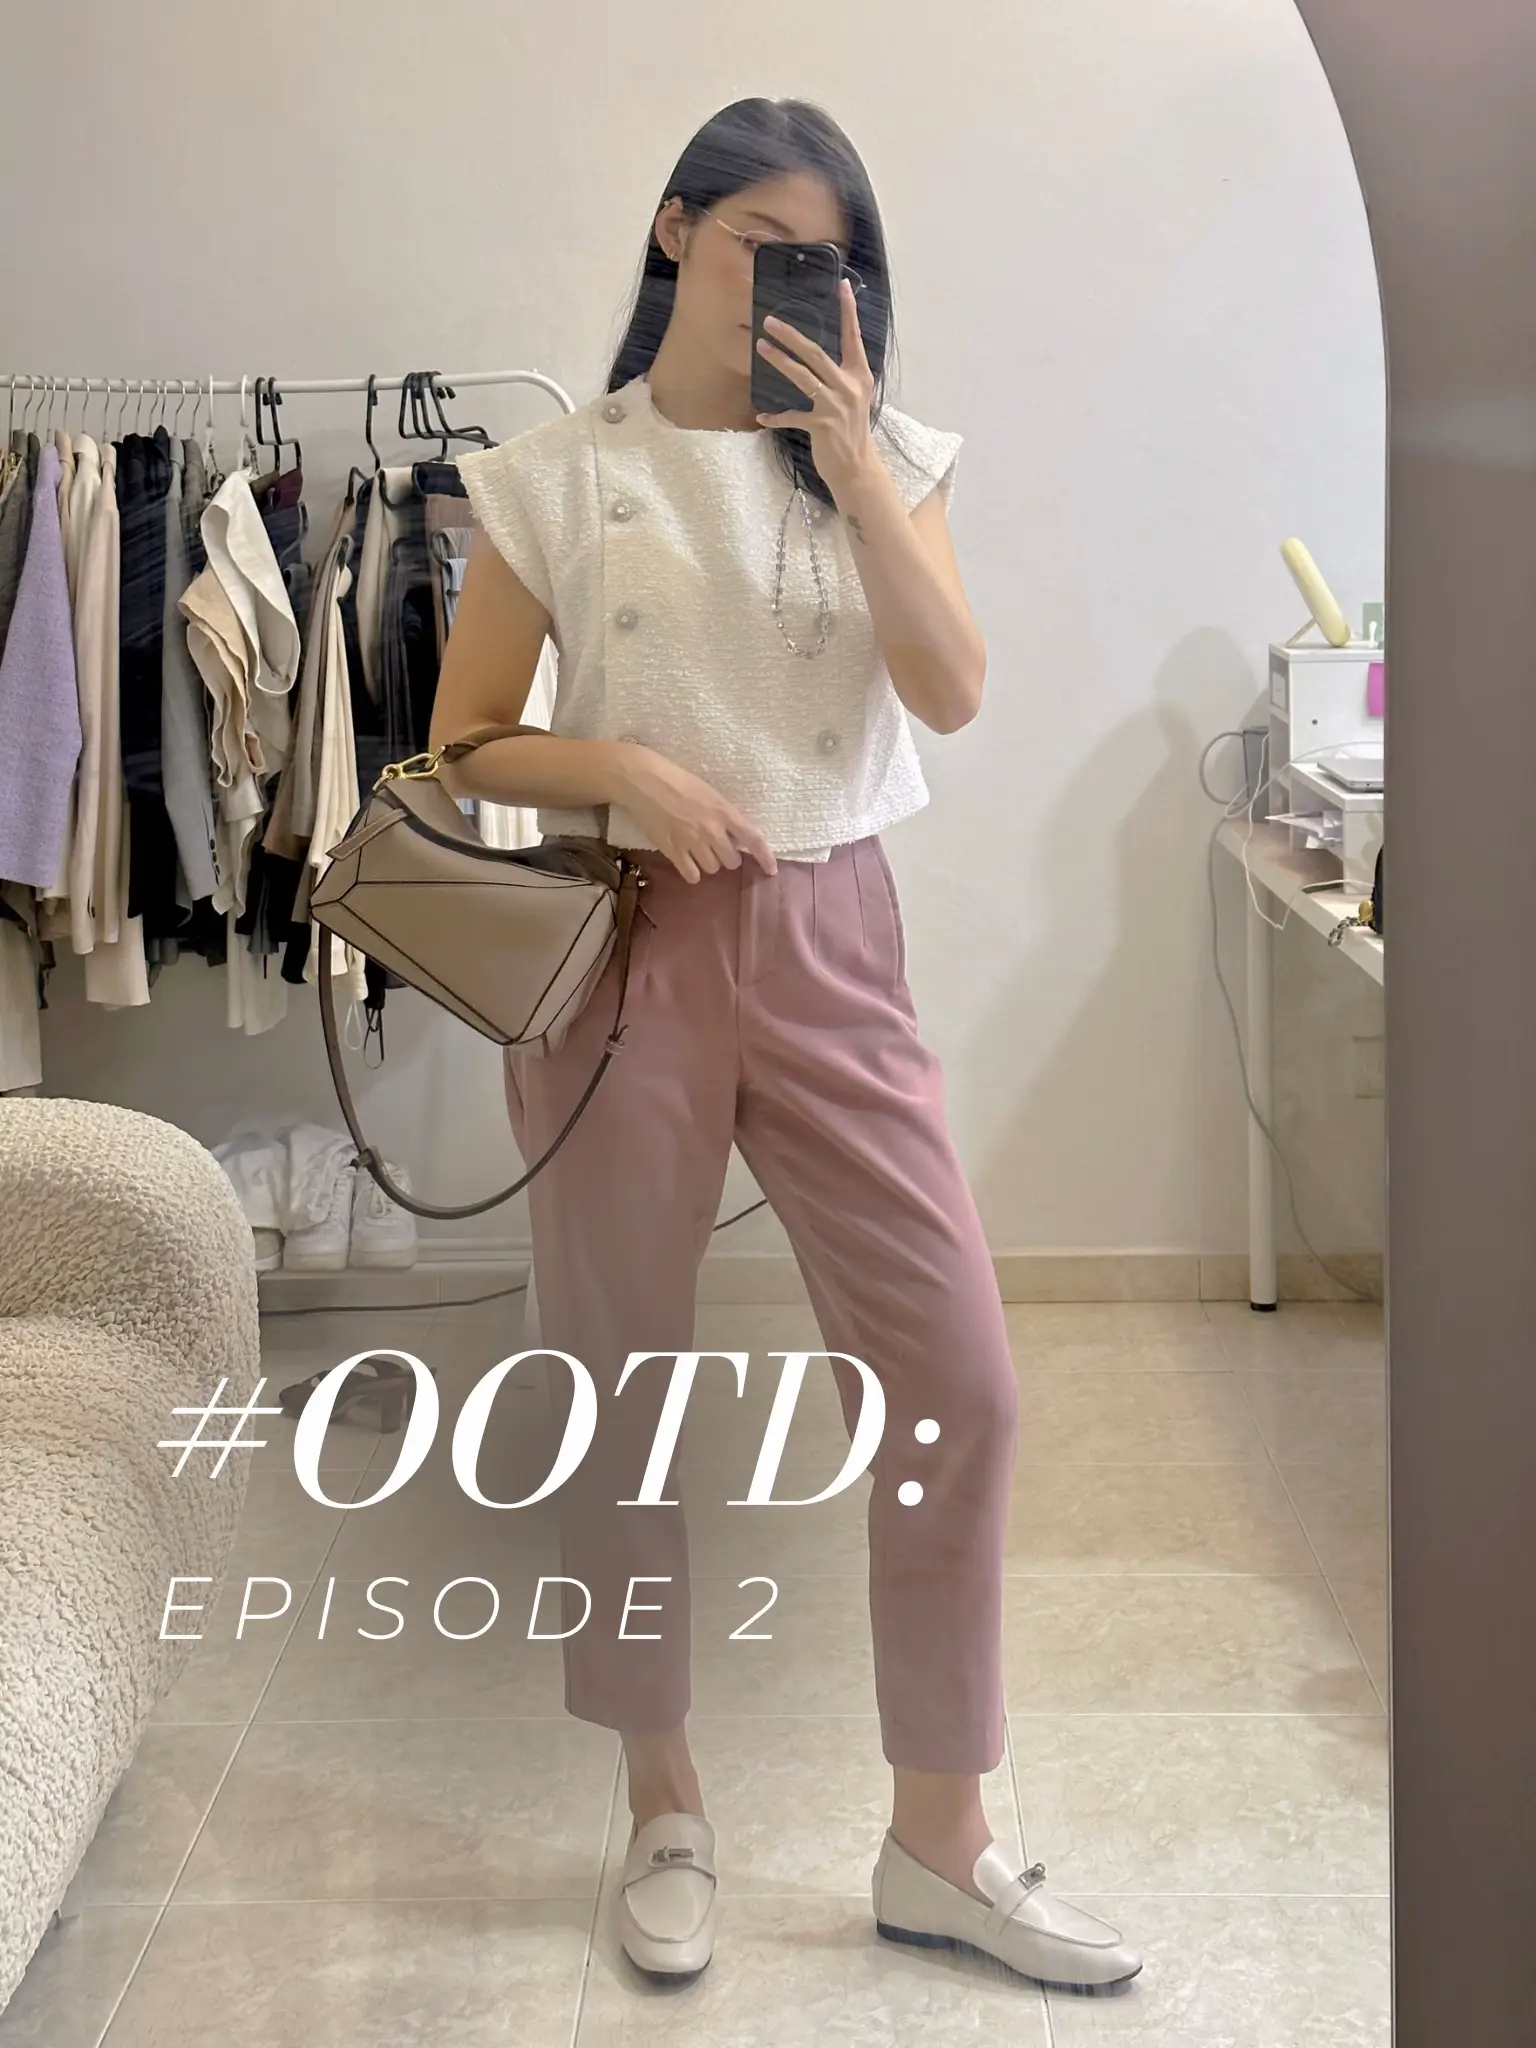 Style like Chanel: Chanel inspired ootd from Maje, Zara, H&M. Fashion &  Jewelry Try-on and Styling 